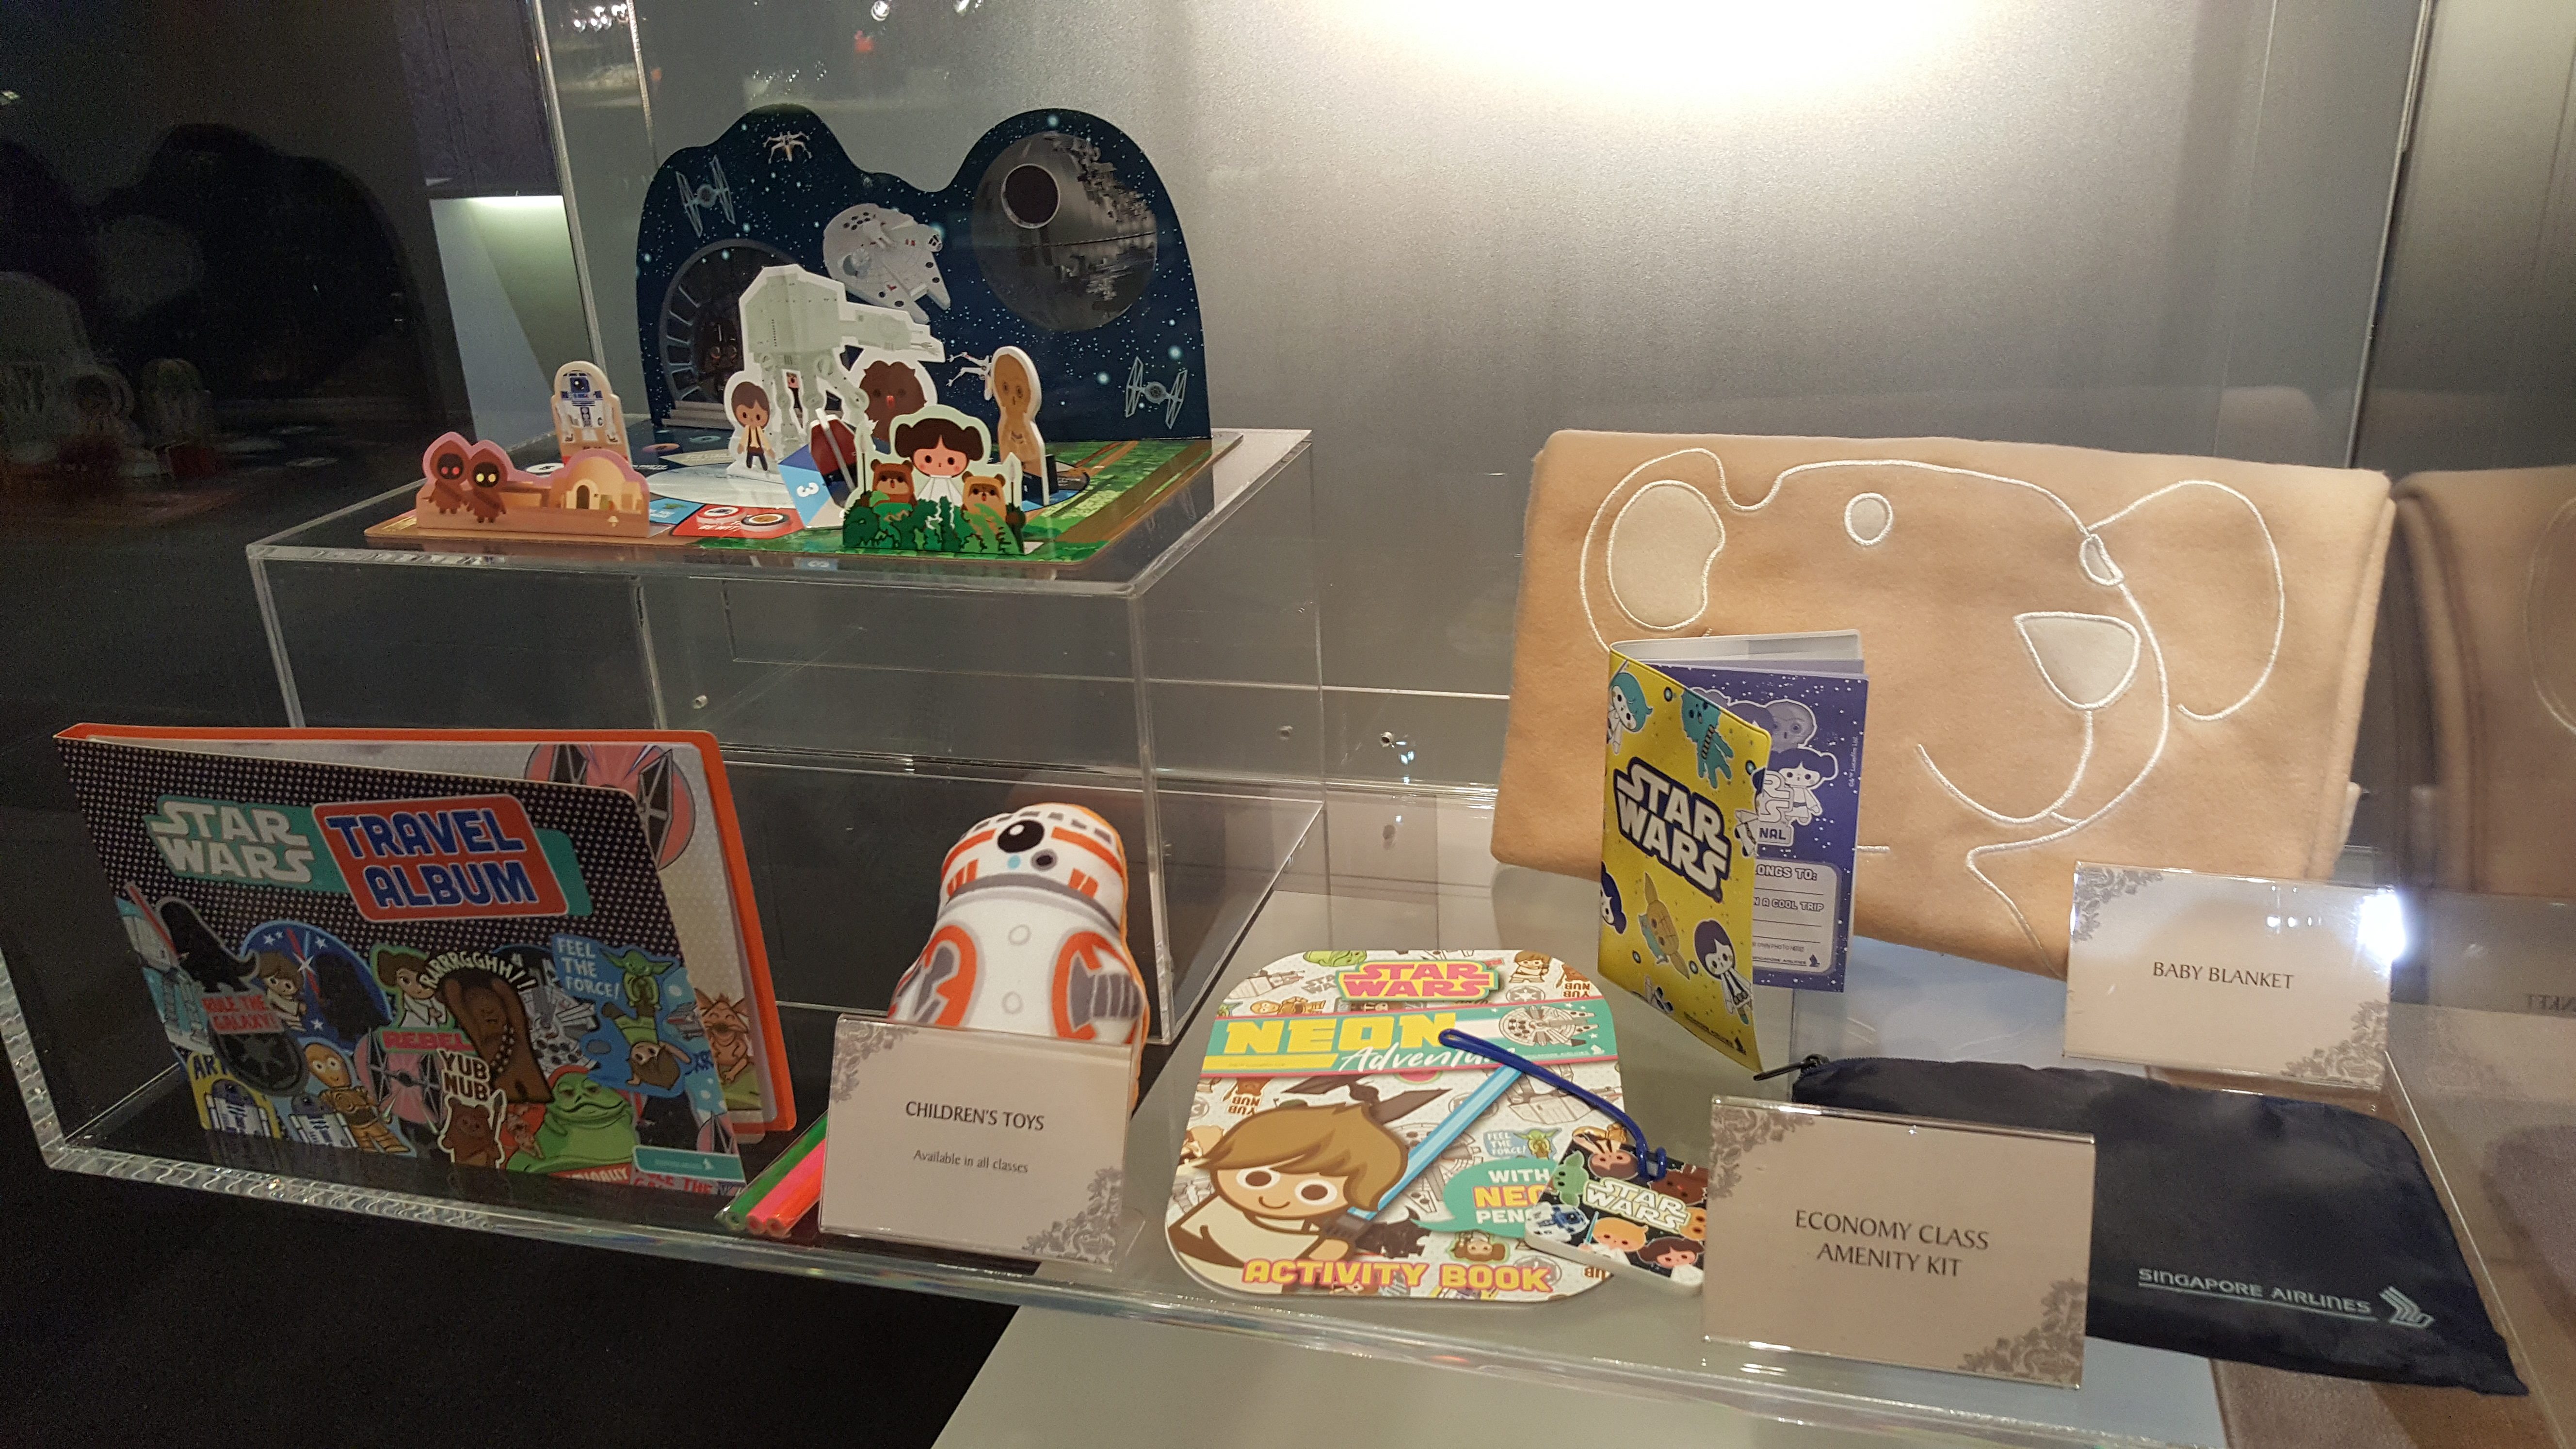 KIDS STUFF. Singapore Airlines also has something for children to enjoy when they ride in the plane 